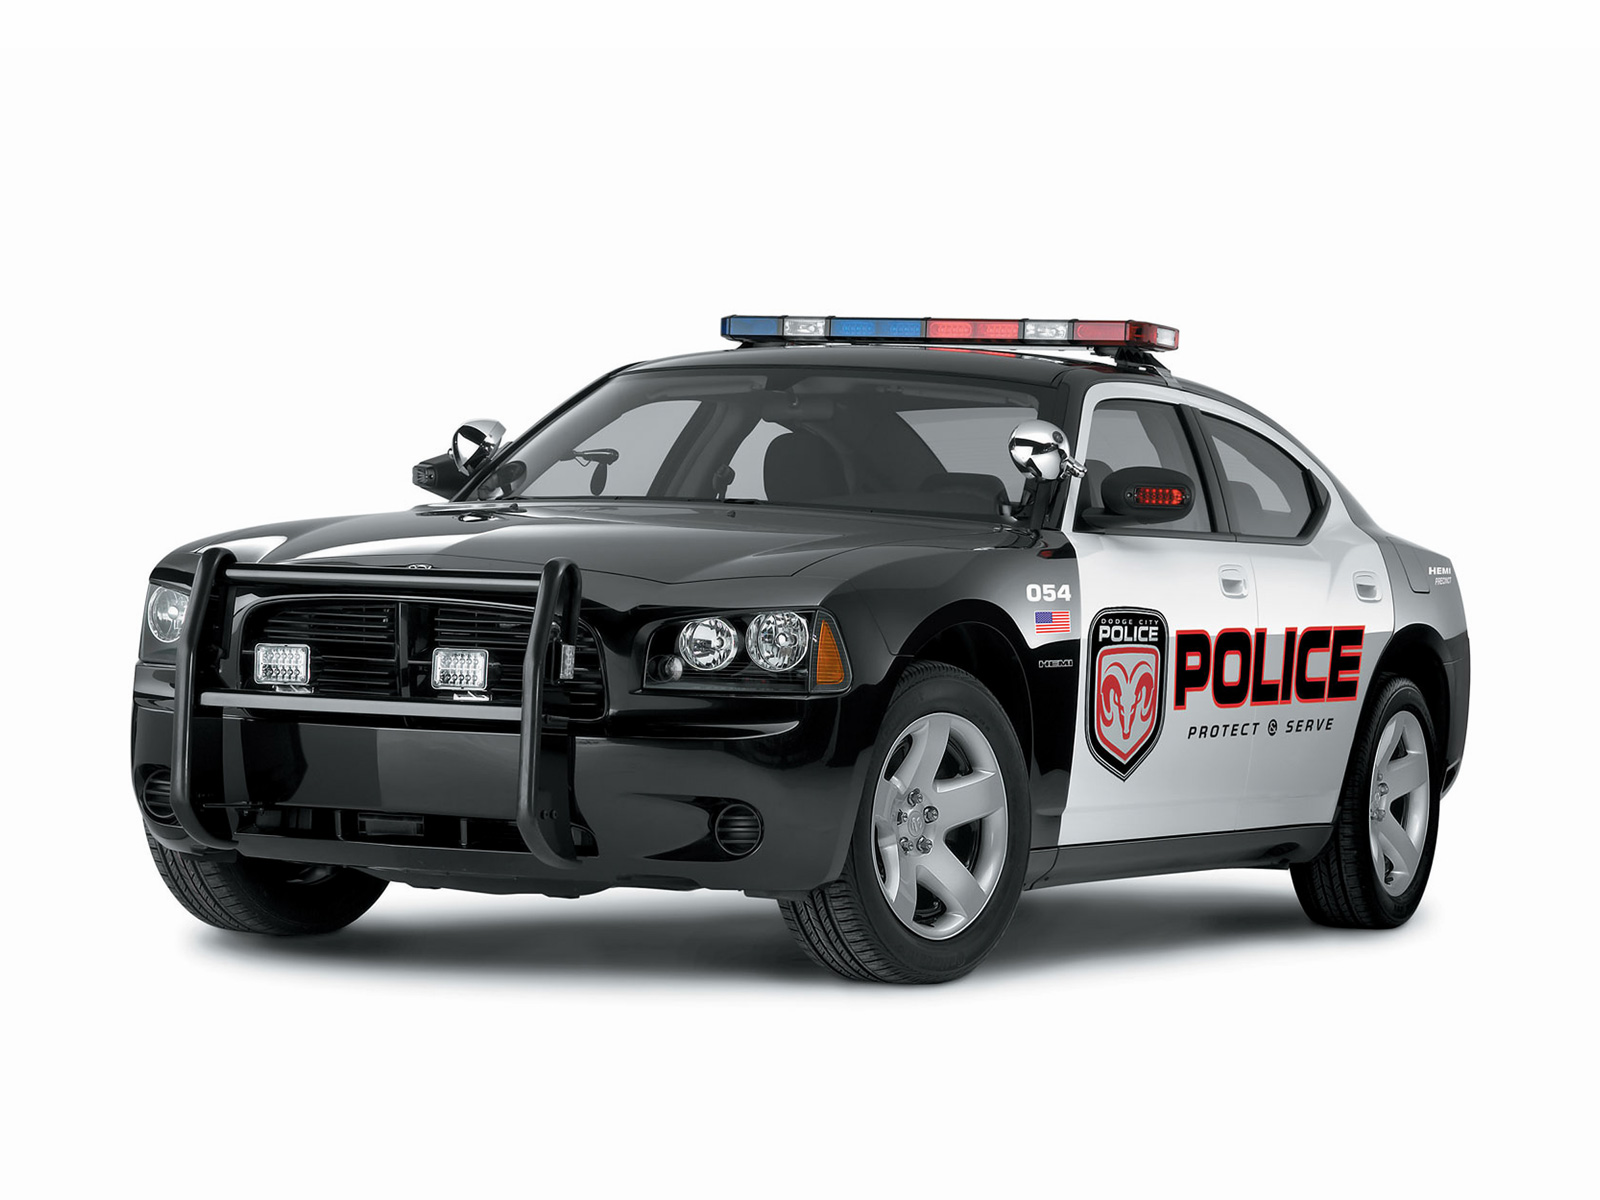 Dodge Police Car Wallpaper And Image Pictures Photos